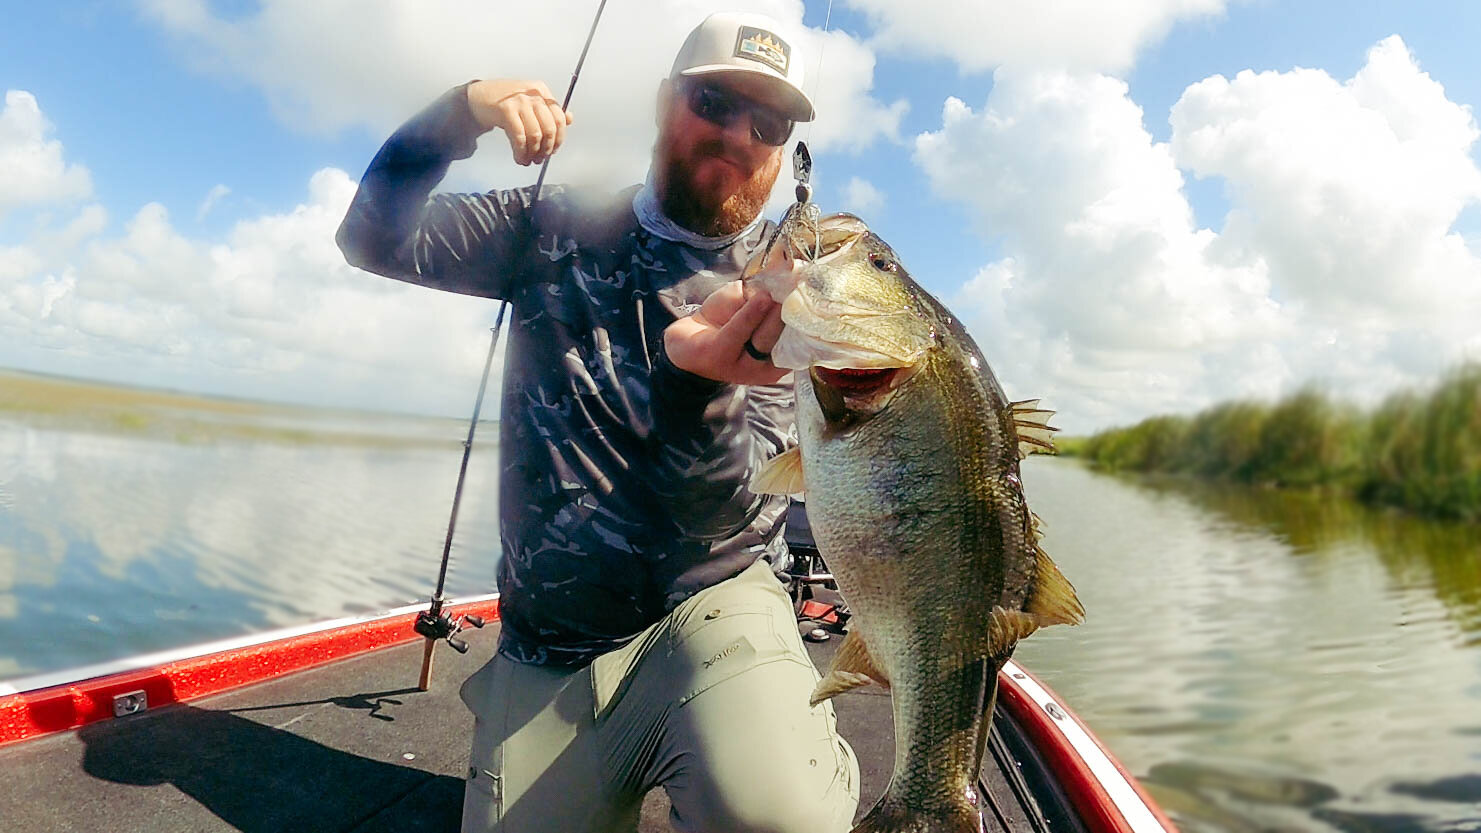 Grass Fishing Tricks For Summer! You NEED These To Catch MORE Fish! —  Tactical Bassin' - Bass Fishing Blog